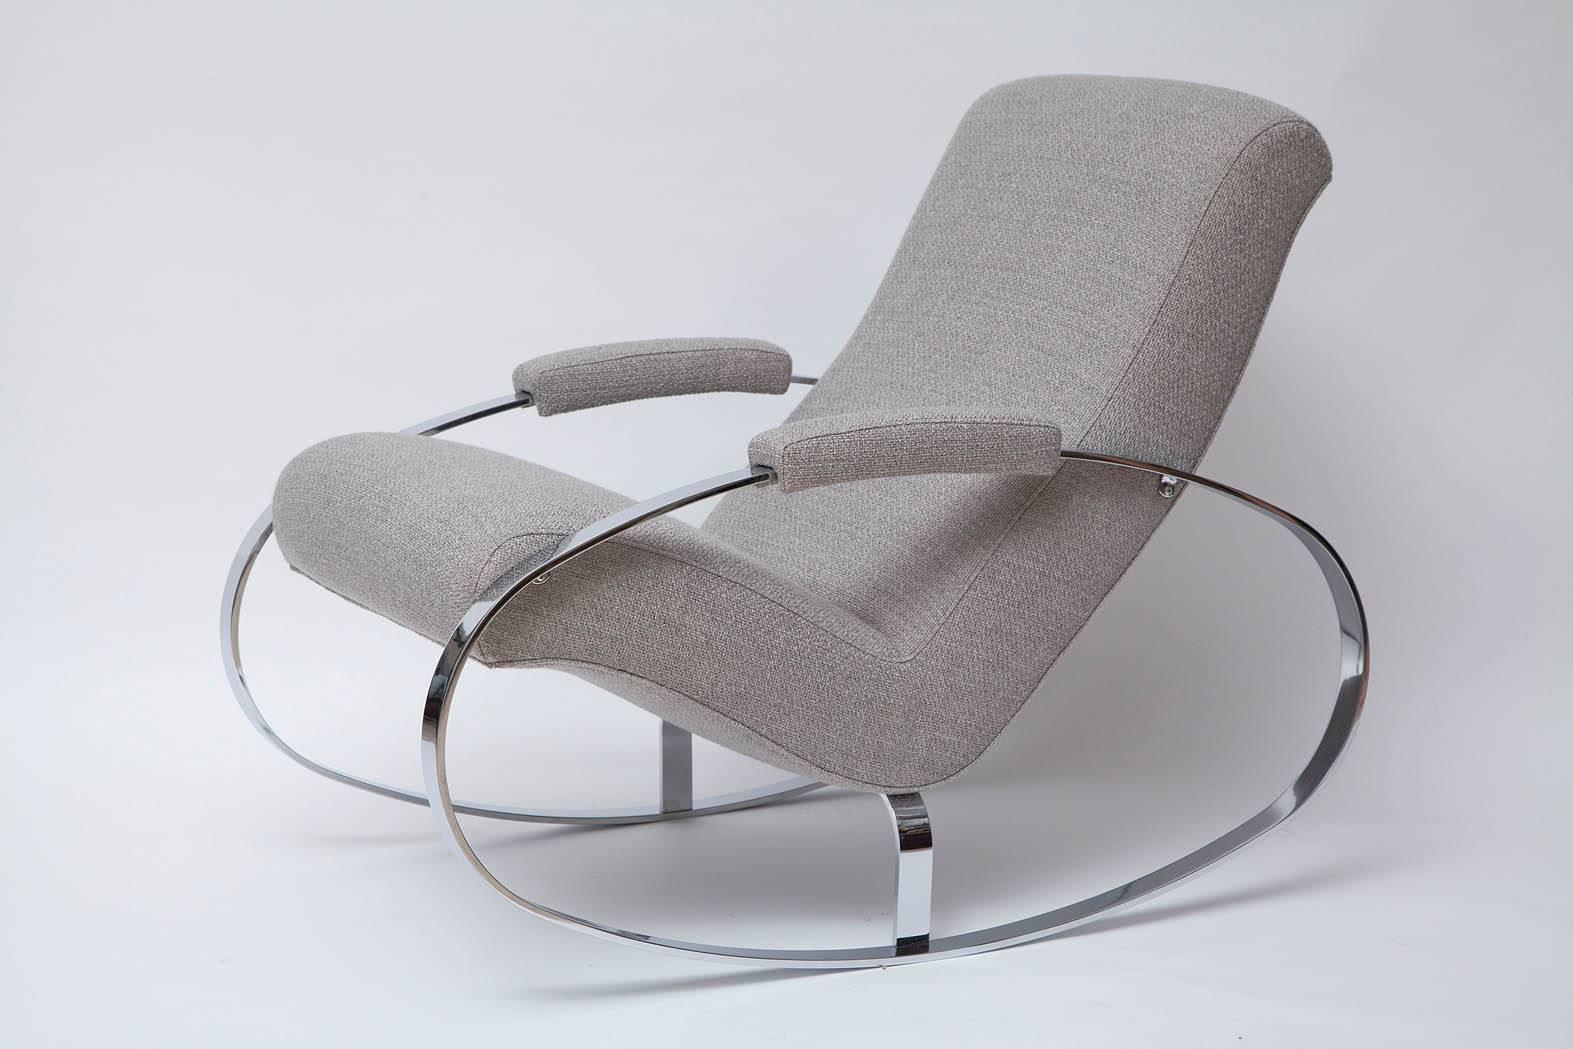 Our favorite kind of 1960s rocker, Guido Faleschini rocking chair in polished chrome, impeccably upholstered with all new foam and nubby grey fabric. (Swatches available.)